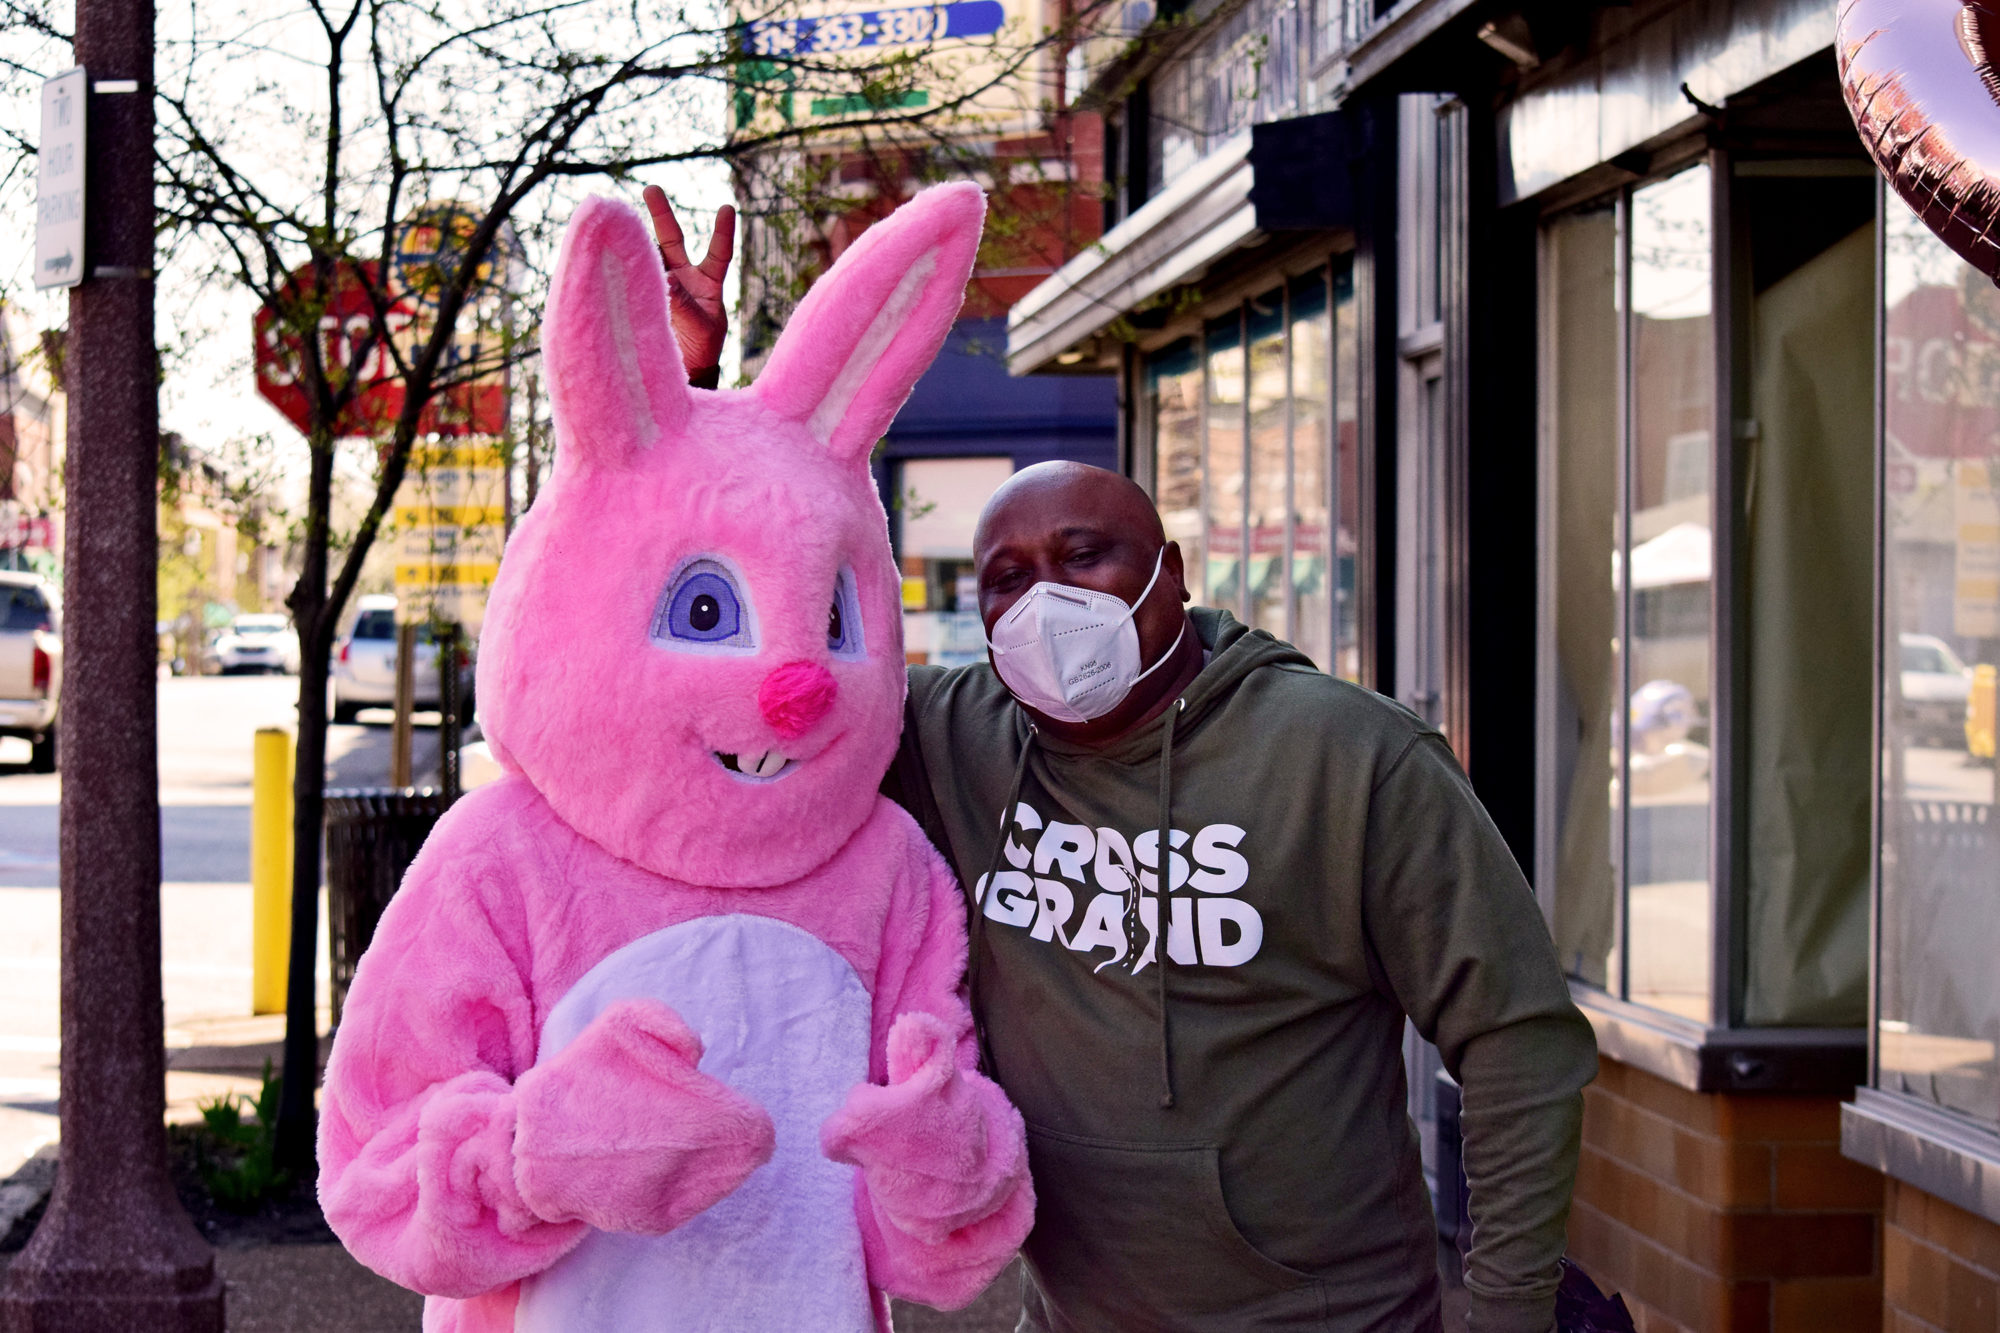 Chip Smith of Cross Grand along with the Easter Bunny in Downtown Dutchtown, St. Louis, MO.